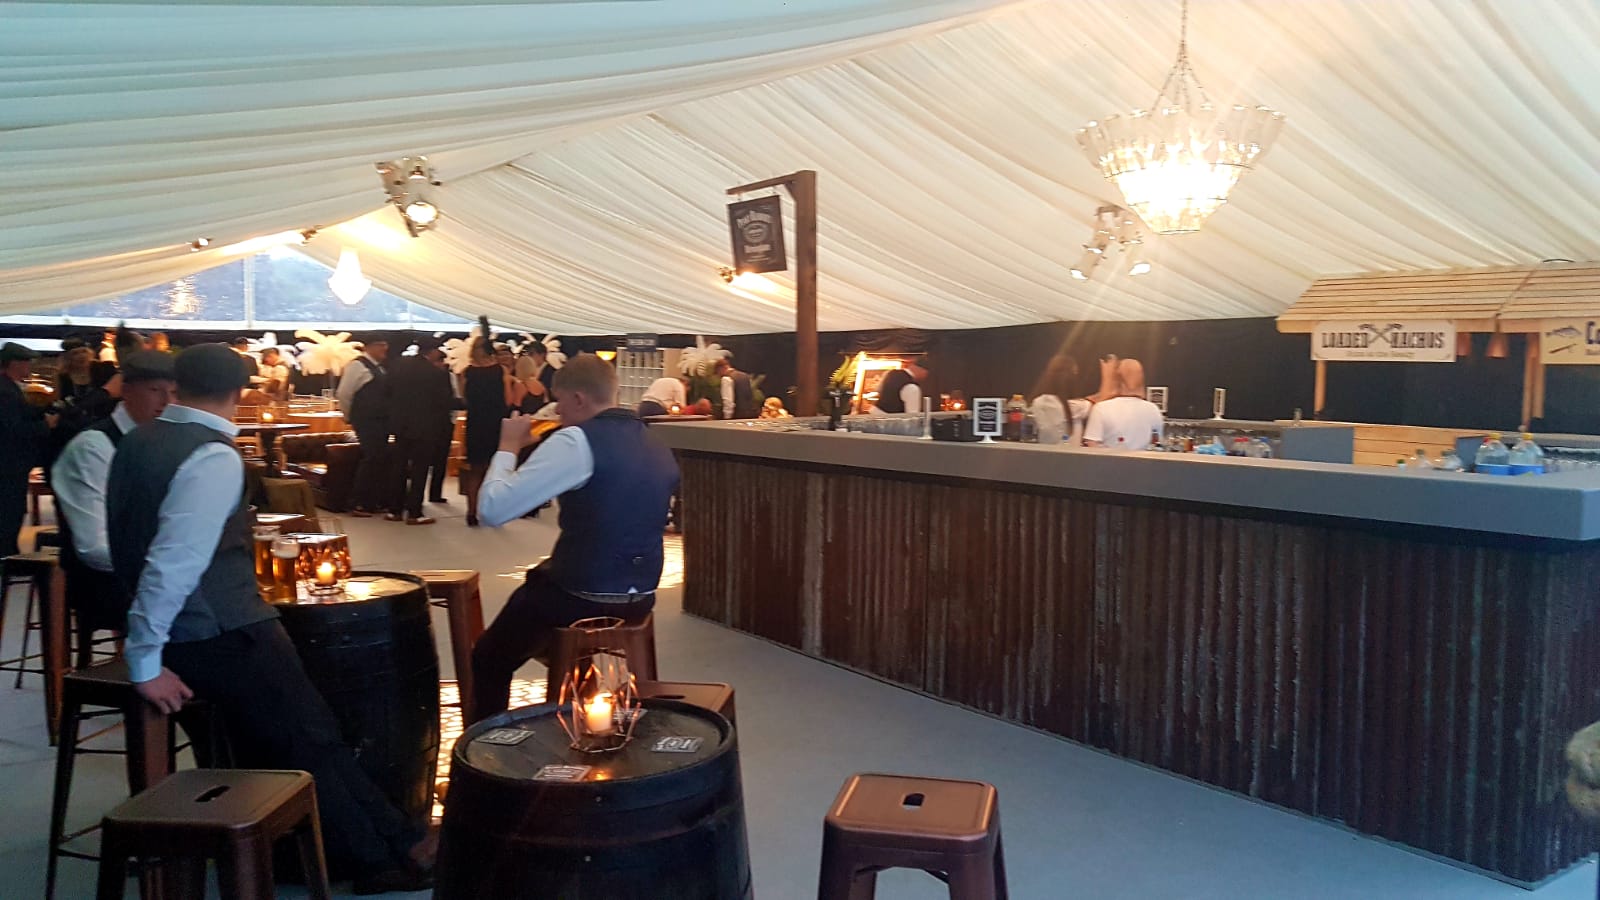 Peaky Blinders Themed Party Marquee